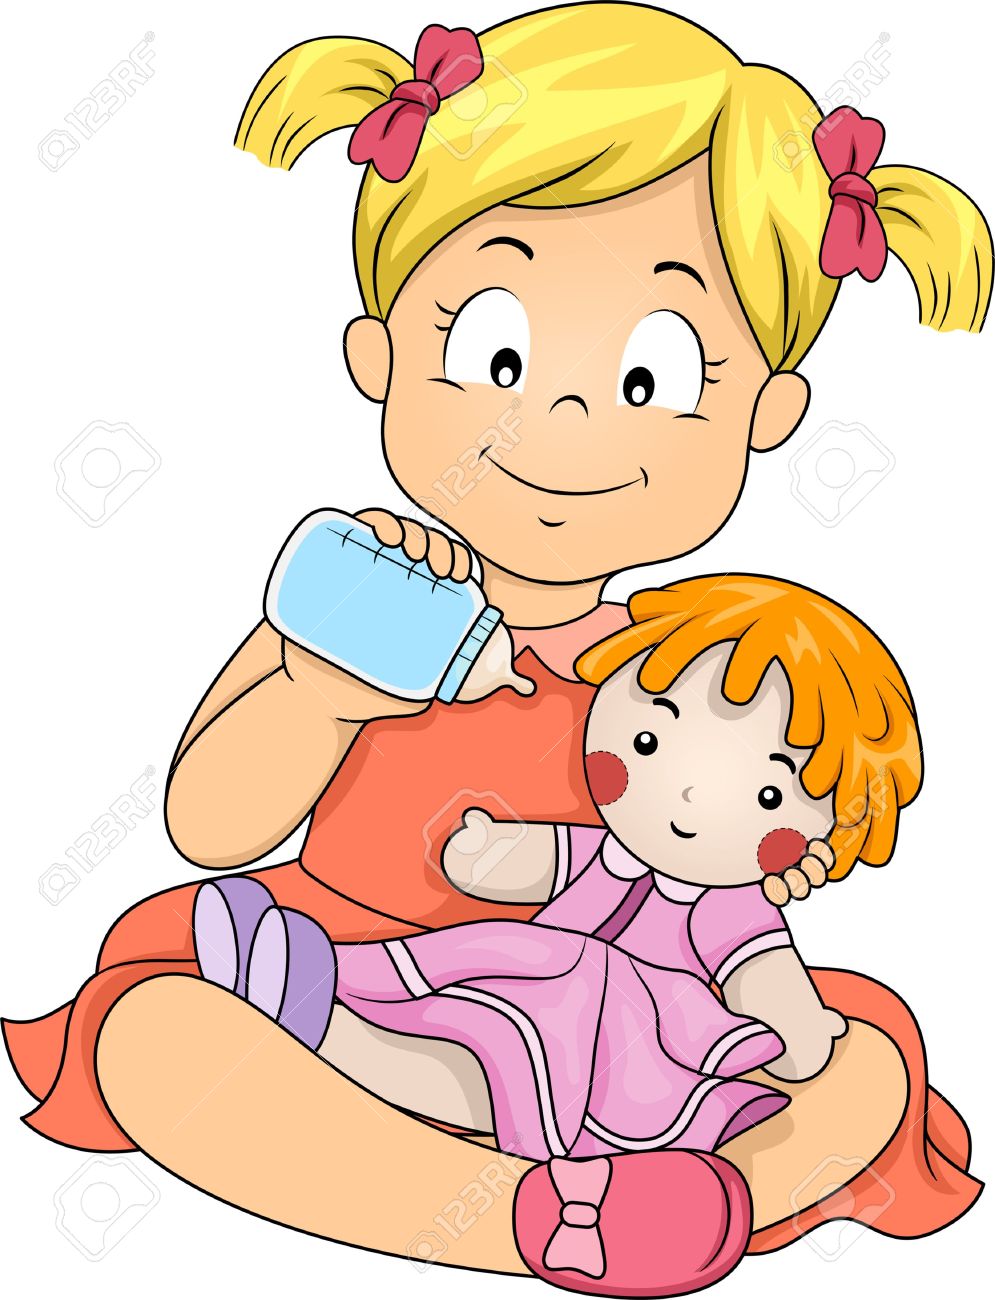 doll clipart images - photo #28